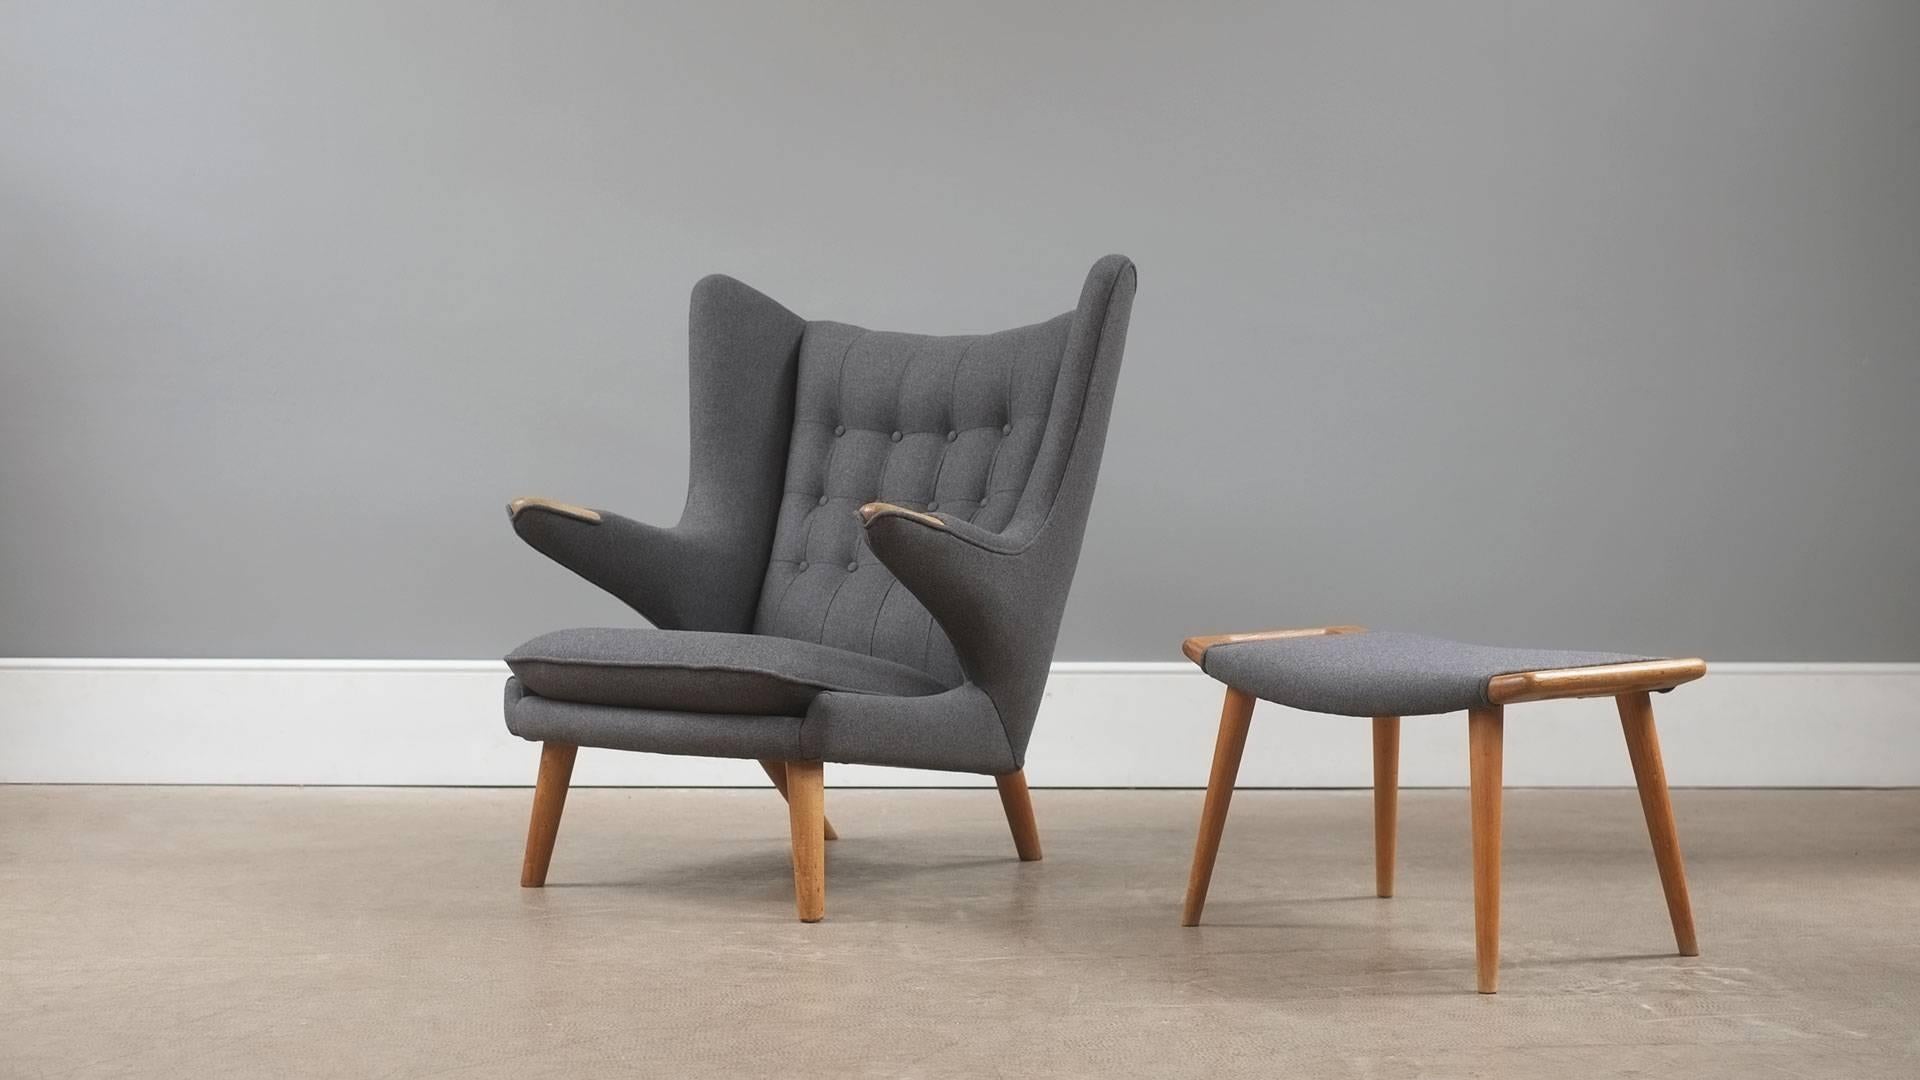 Amazing papa bear chair and footstool designed by Hans Wegner for AP Stolen, Denmark. Beautiful 1960s example with oak legs and paws. Fully reconditioned and re-upholstered in Warwick grey wool. Both pieces retaining original Danish furniture label.